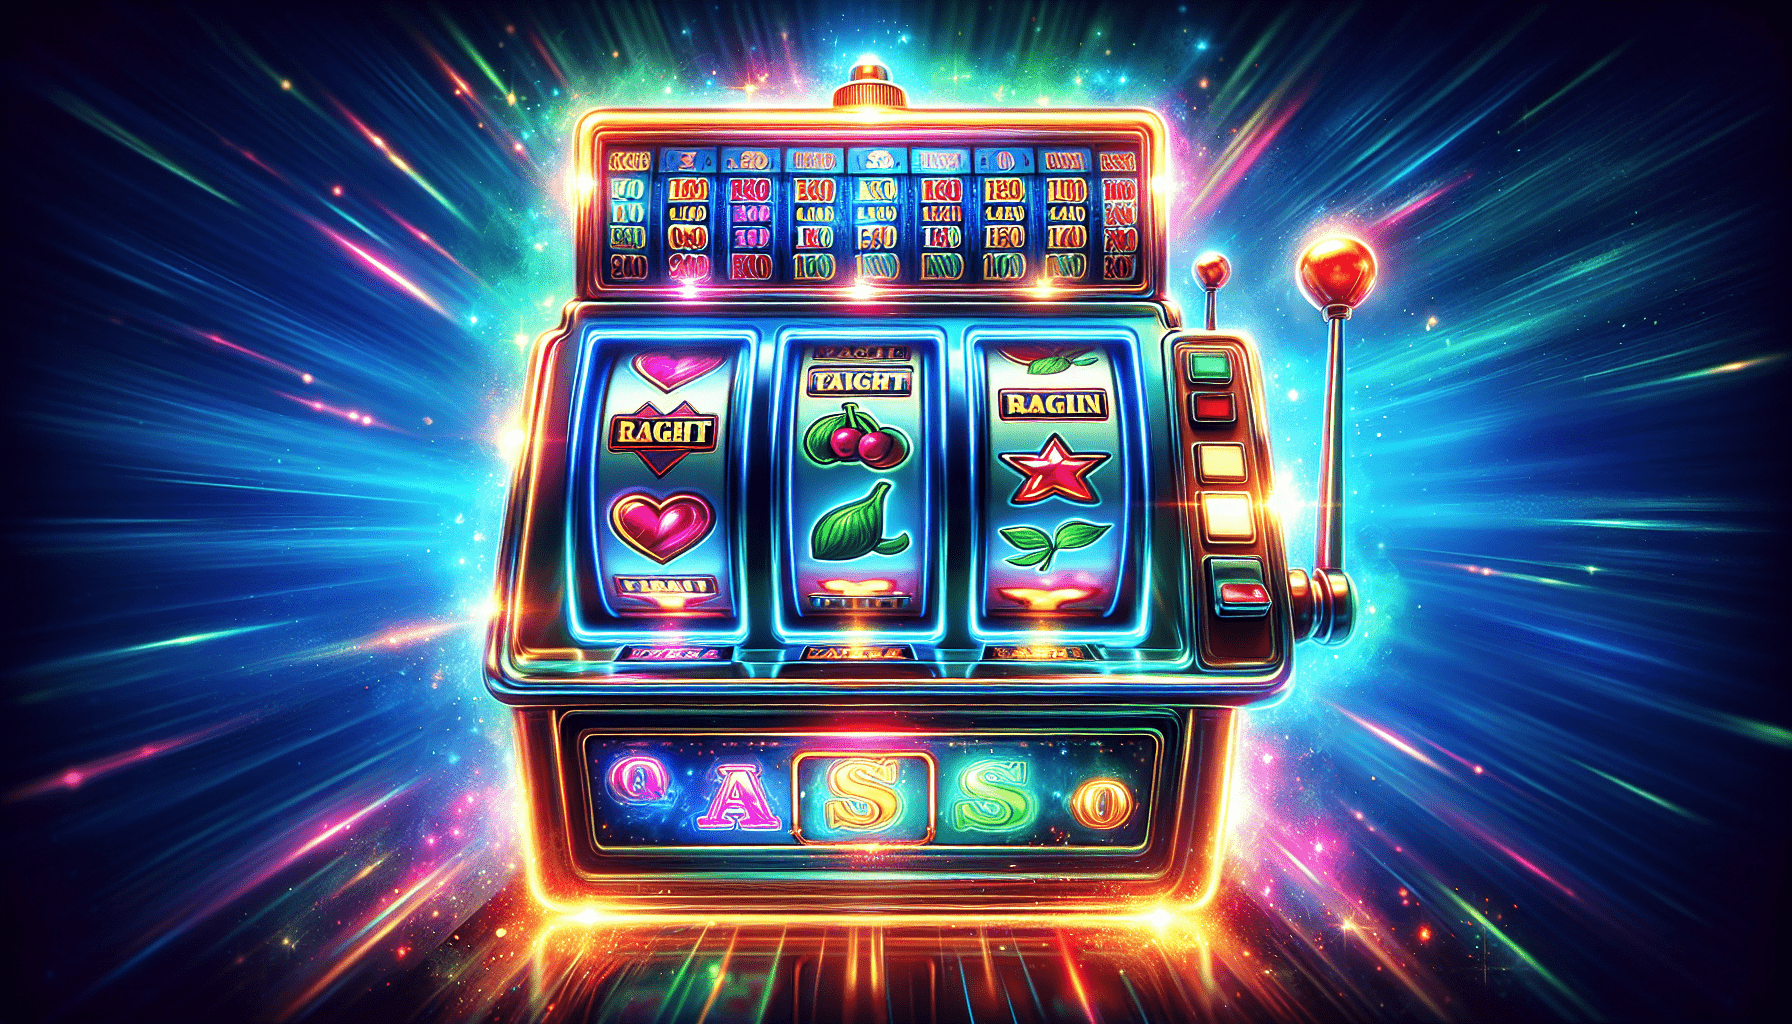 Can You Predict When A Slot Machine Will Hit?